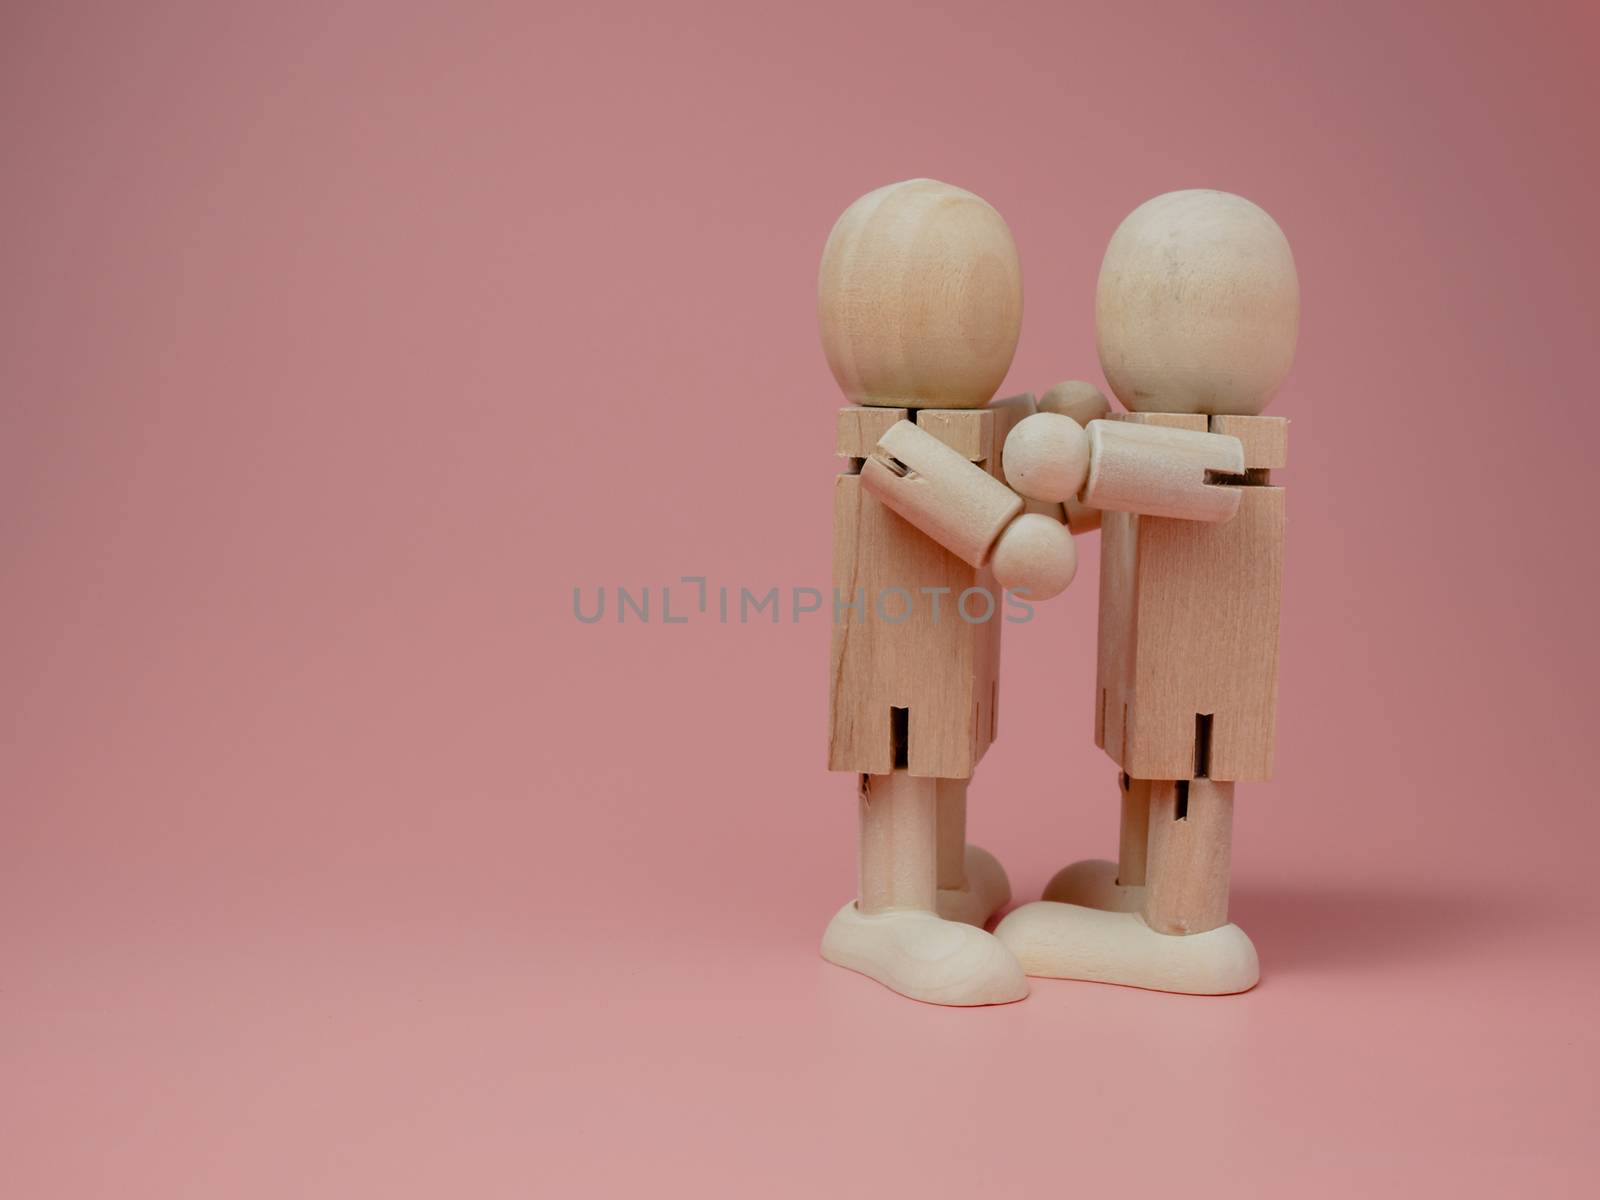 2 wooden dolls hugging each other on a pink background. Concept by Unimages2527